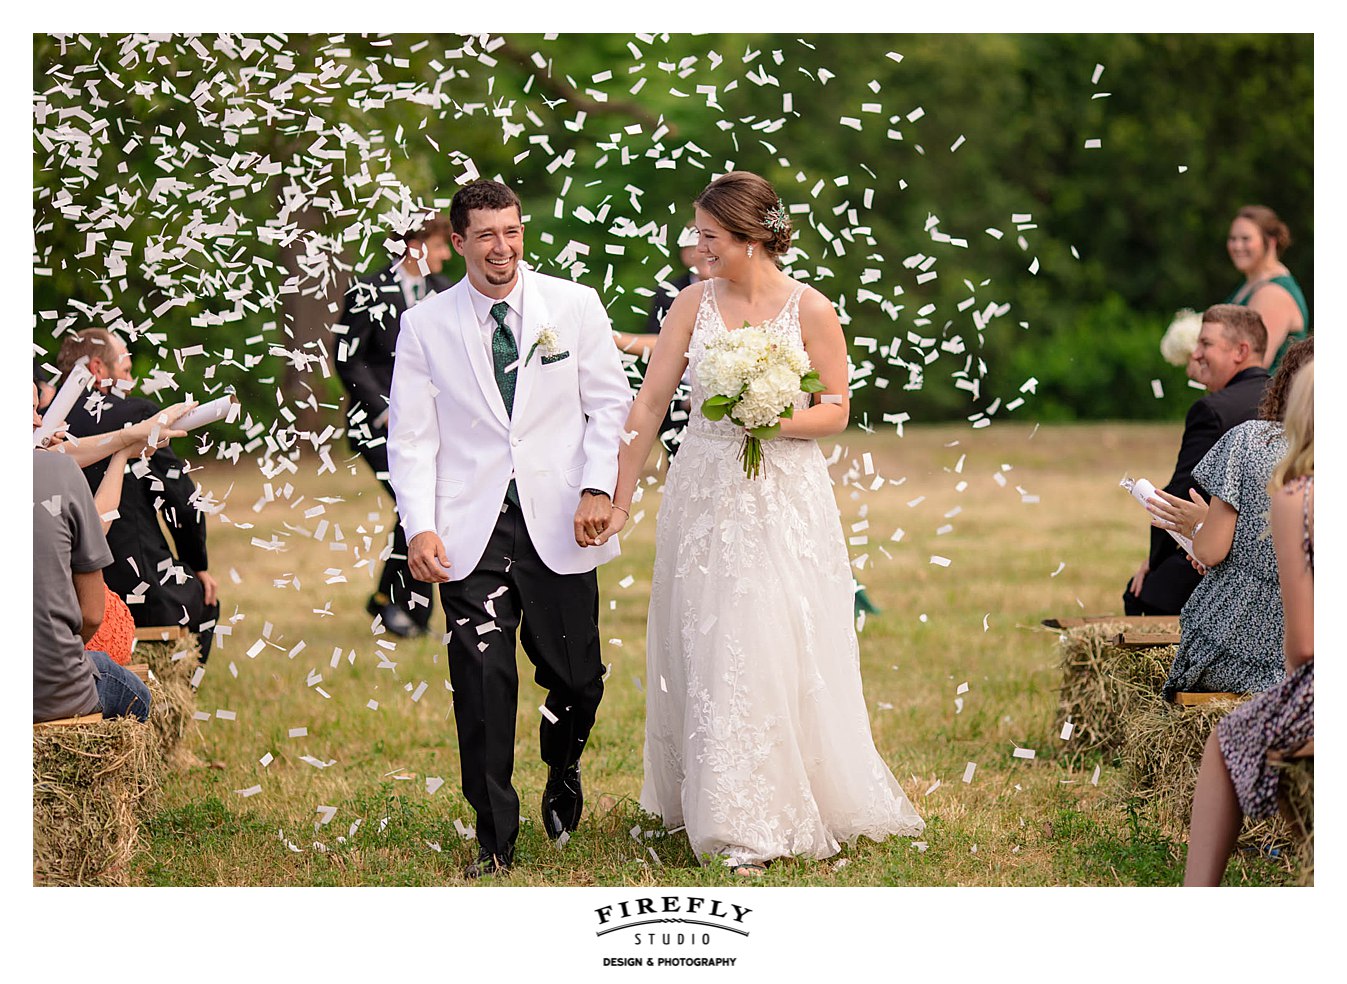 Wes & Bri's farm wedding in June in Industry Illinois at Fowler farms